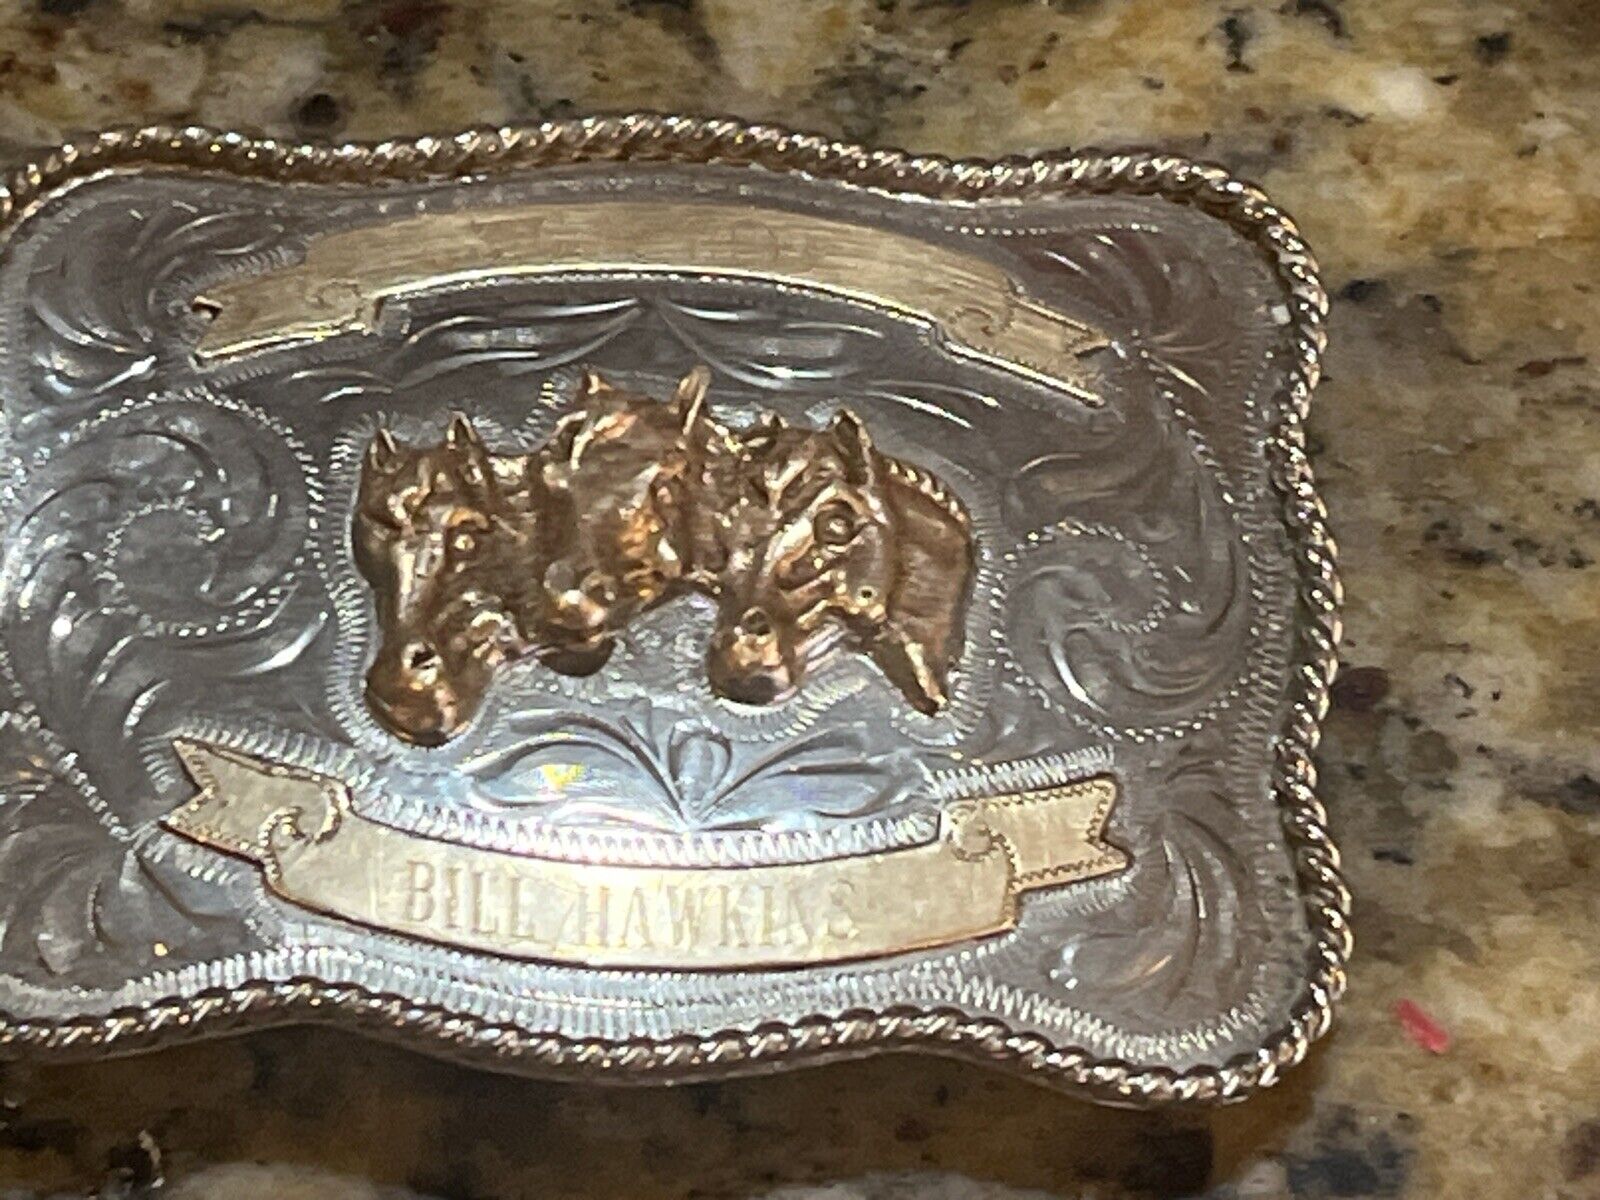 Vintage 1993 Cowboy rophy Rodeo Award Belt Buckle by TexTan